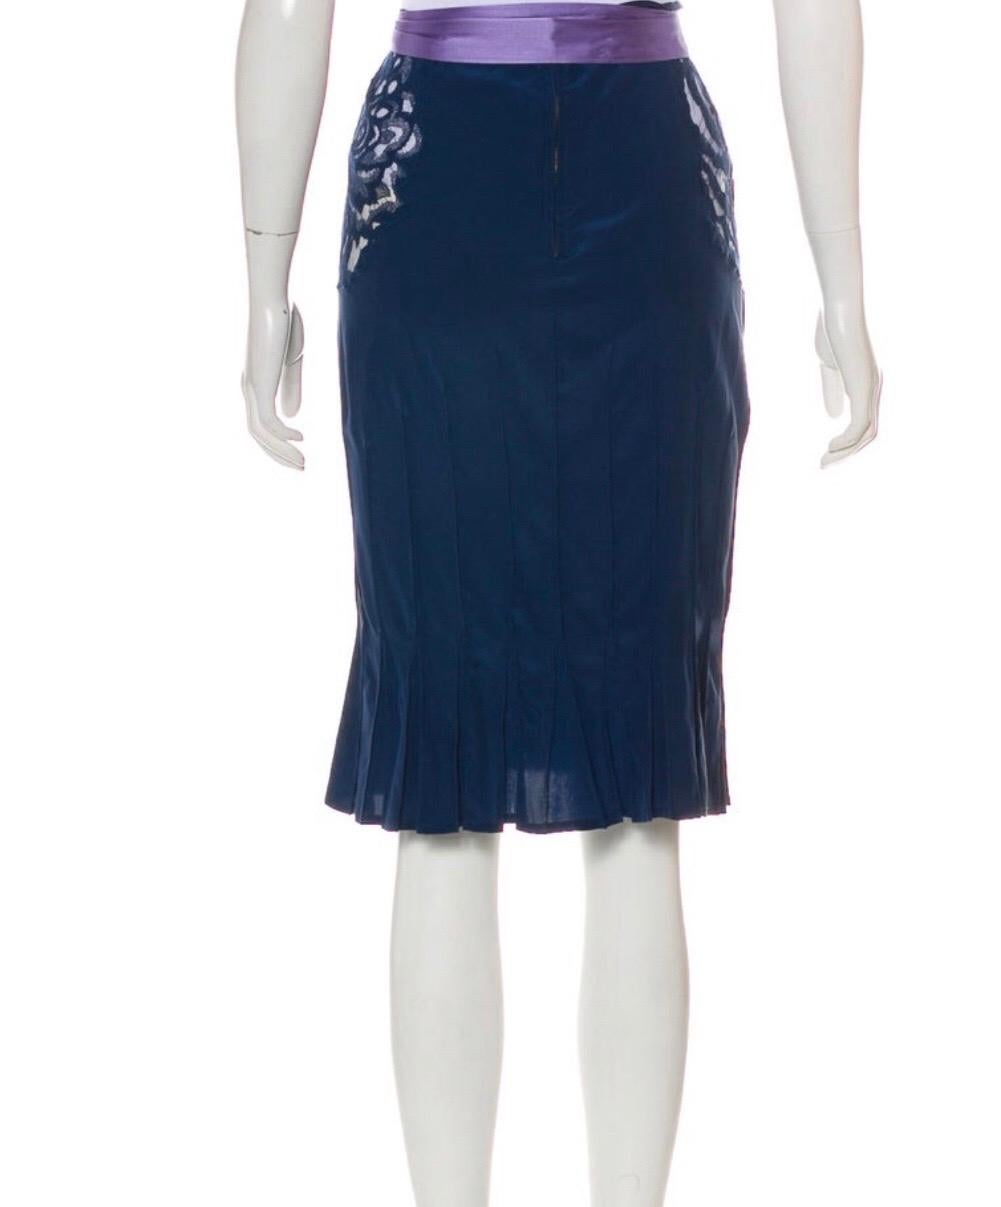 Black 2004 Yves Saint Laurent by Tom Ford blue silk skirt with lace accents on sides